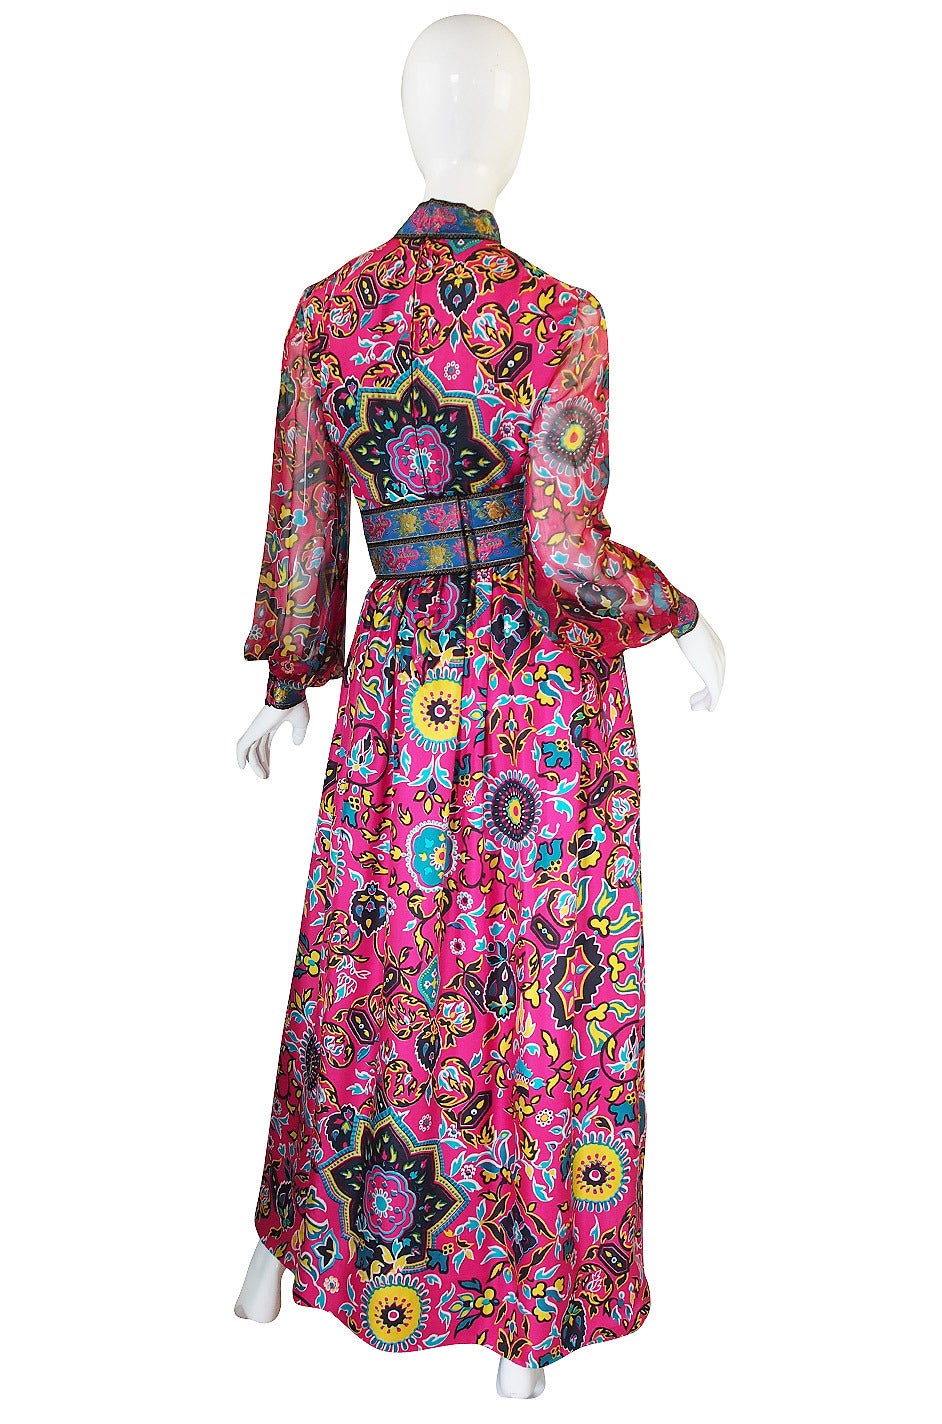 The twin of this stunning silk print maxi dress by Oscar de la Renta is held in the Goldstein Museum of Design (the last two photos are their collection archive photos) and they have this dated as being from the 1960-1969 period. The dress is